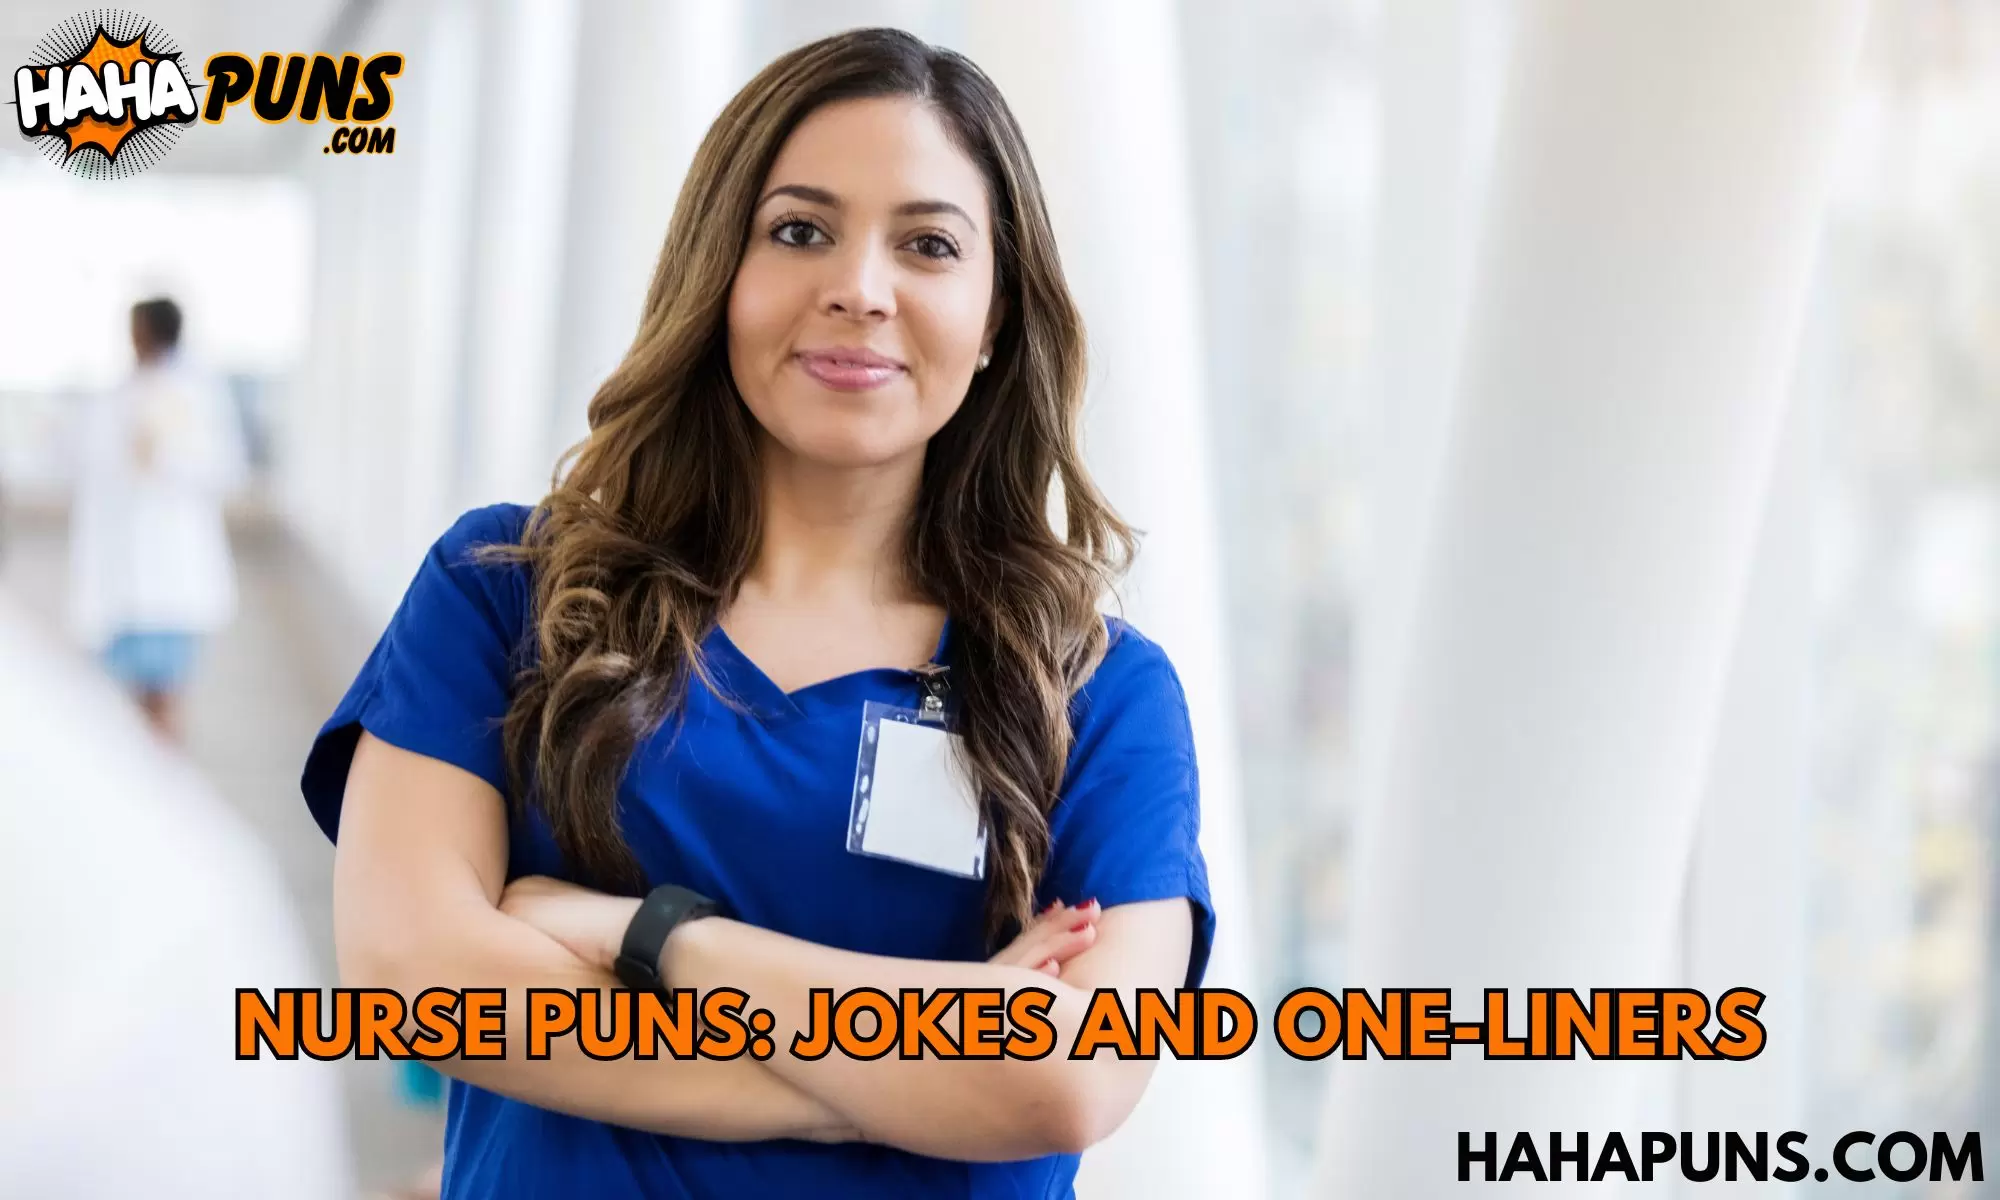 Nurse Puns: Jokes And One-Liners